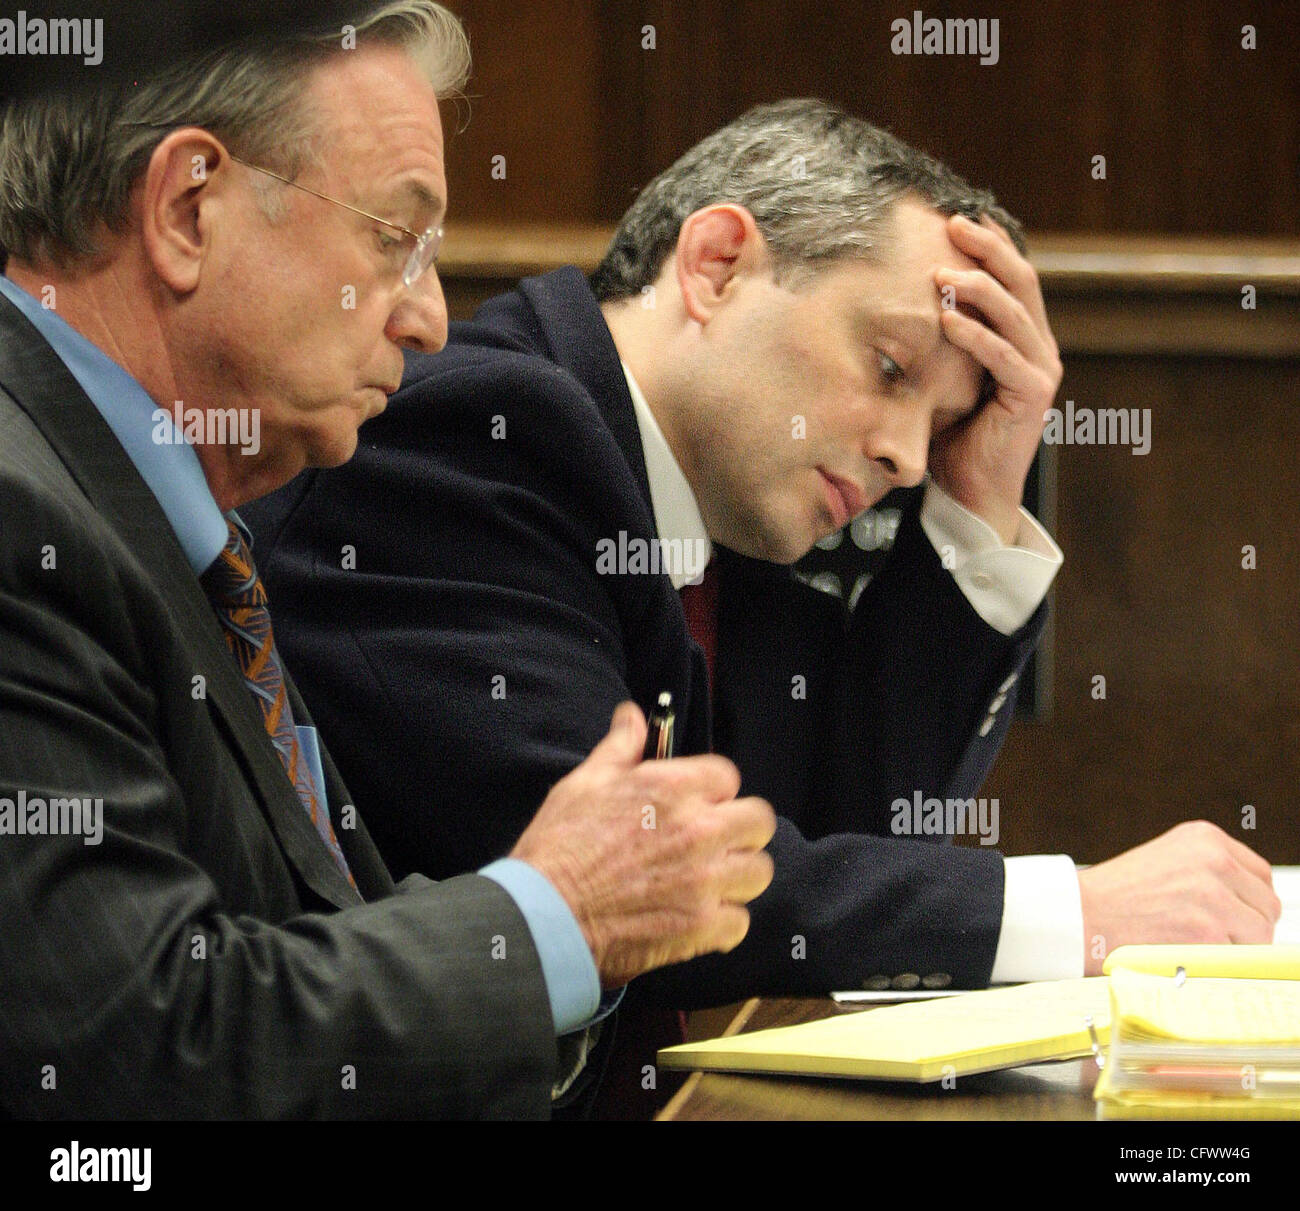 Mar 09, 2007 - Oakland, CA, USA - HANS REISER and his attorney, WILLIAM DUBOIS , listens while the prosecuter. Greg Dolge, gives his final statement at the hearing to determine if there is enough evidence for a murder trial against Hans Reiser in the murder of his ex-wife, Nin Reiser. (Credit Image: Stock Photo